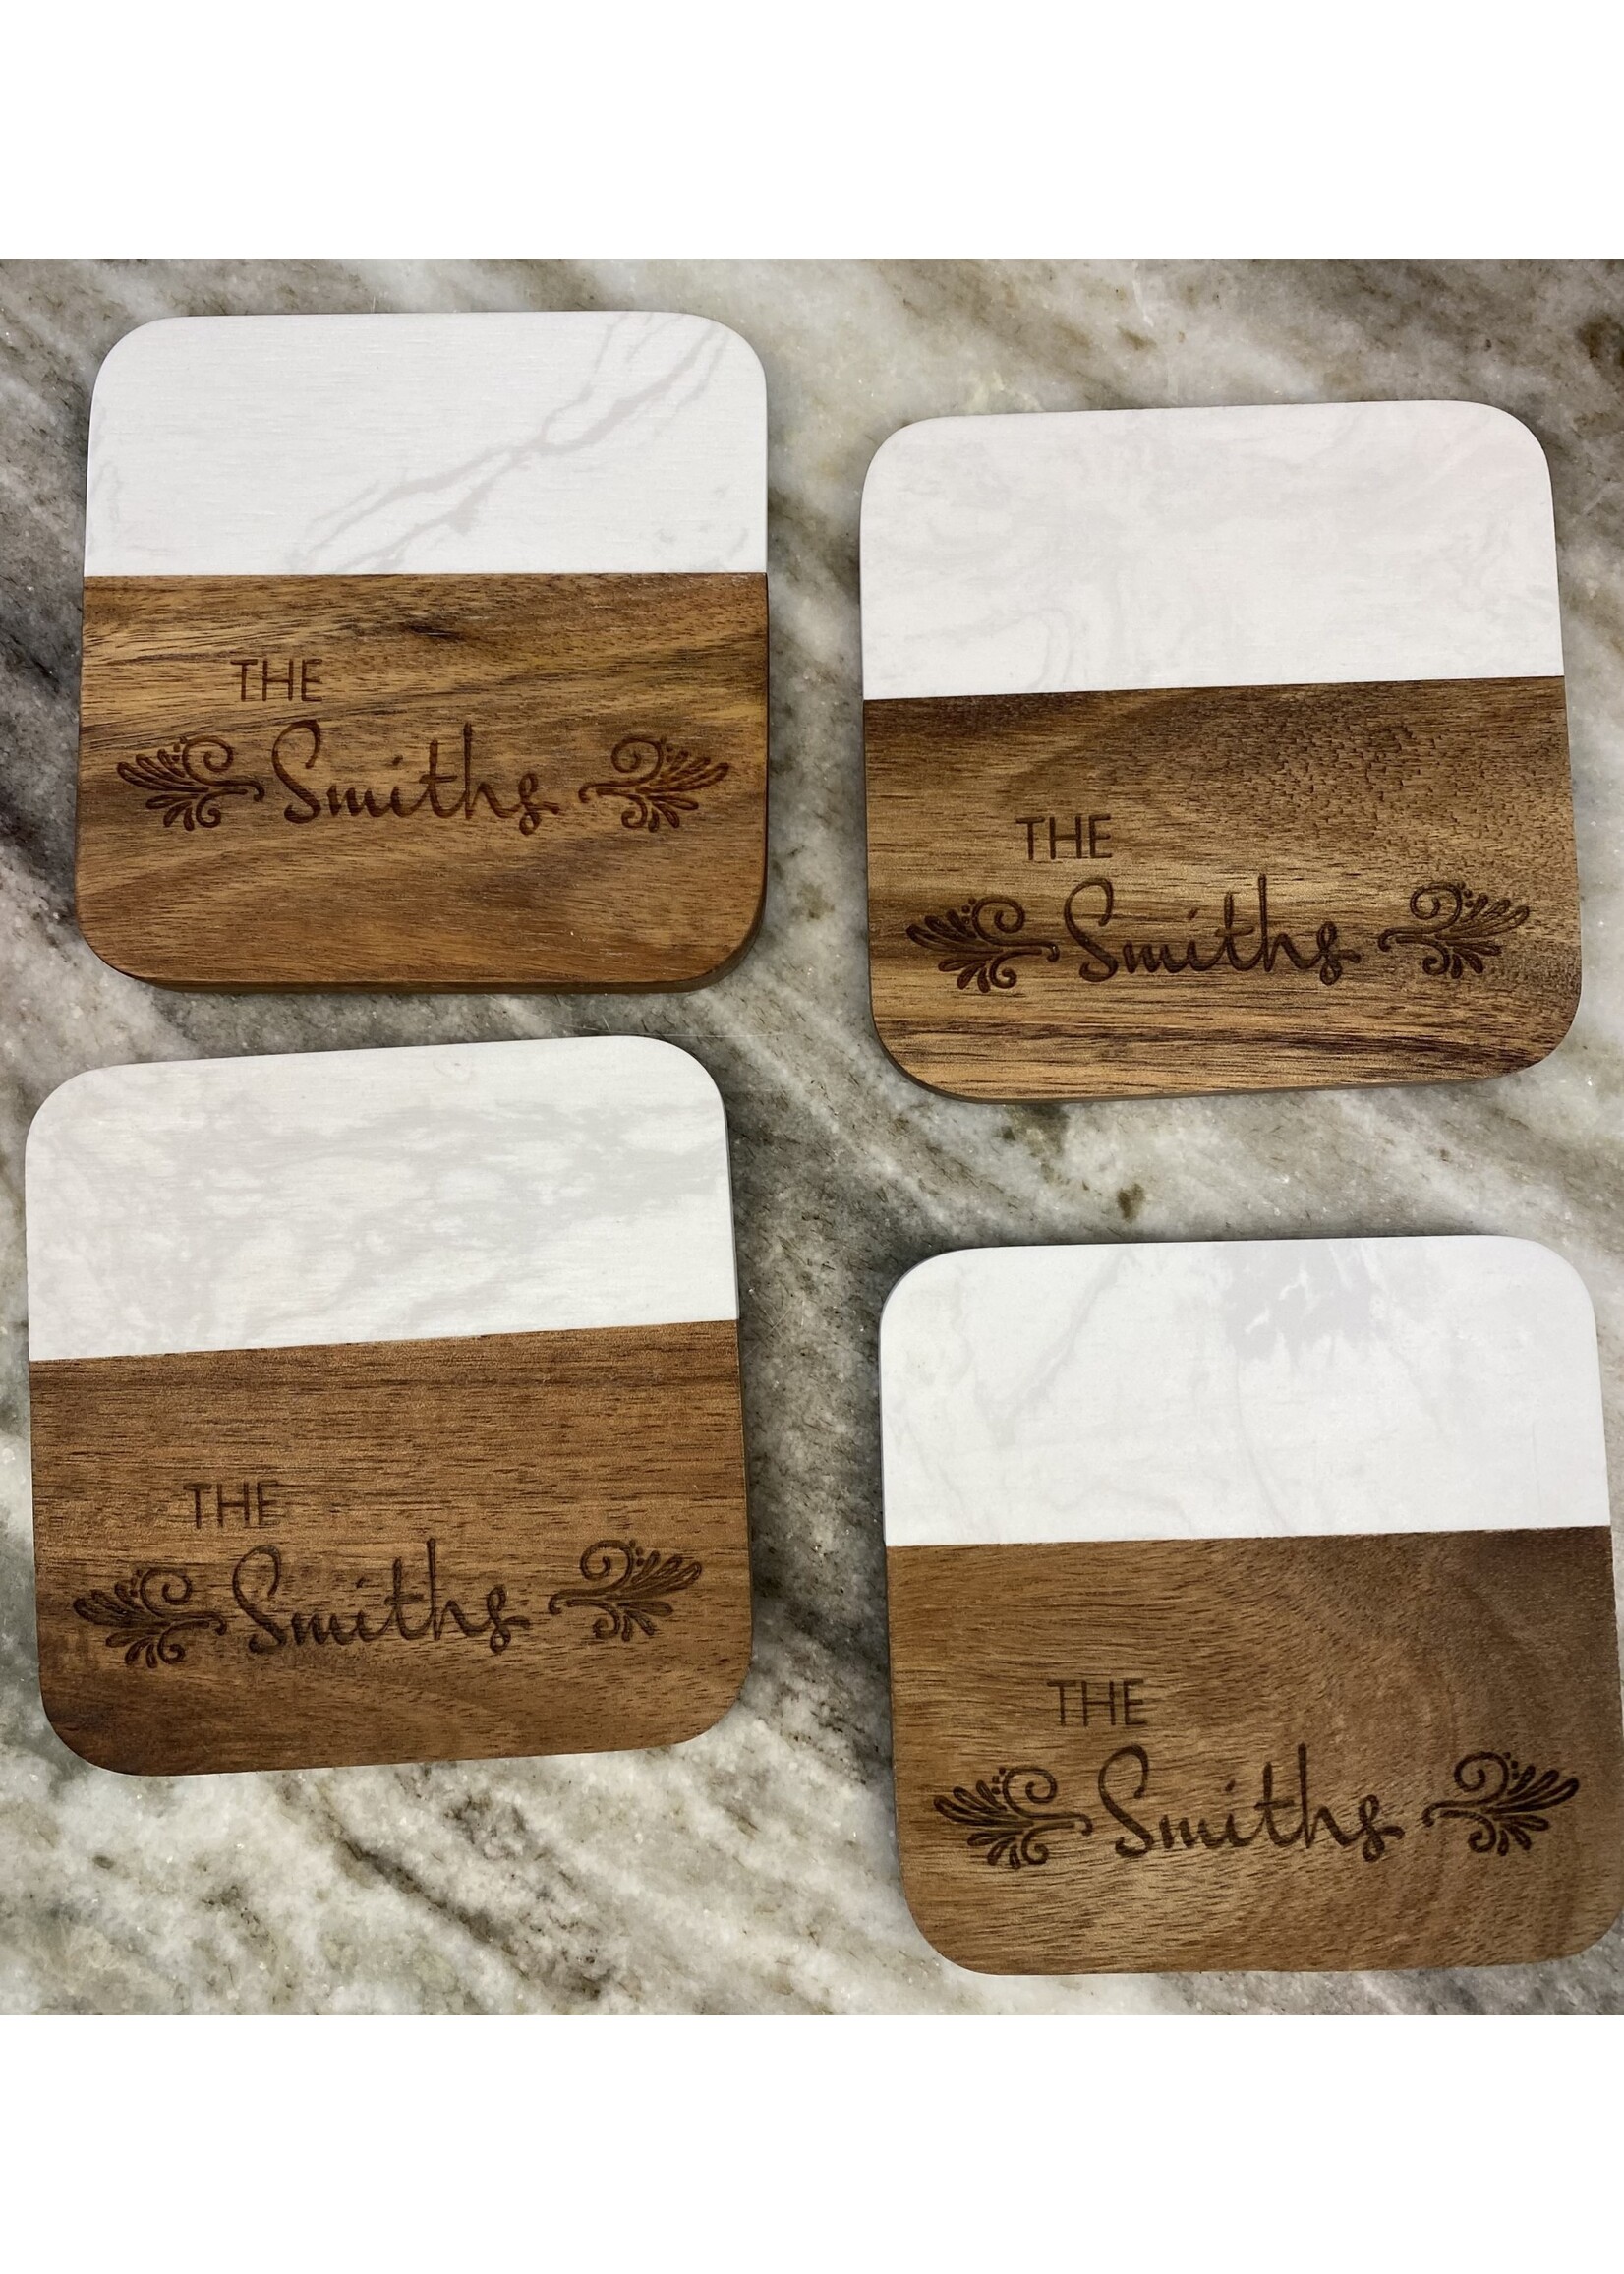 Prim In Proper Marble/Wood Coaster 4" Square Personalized Set of 4